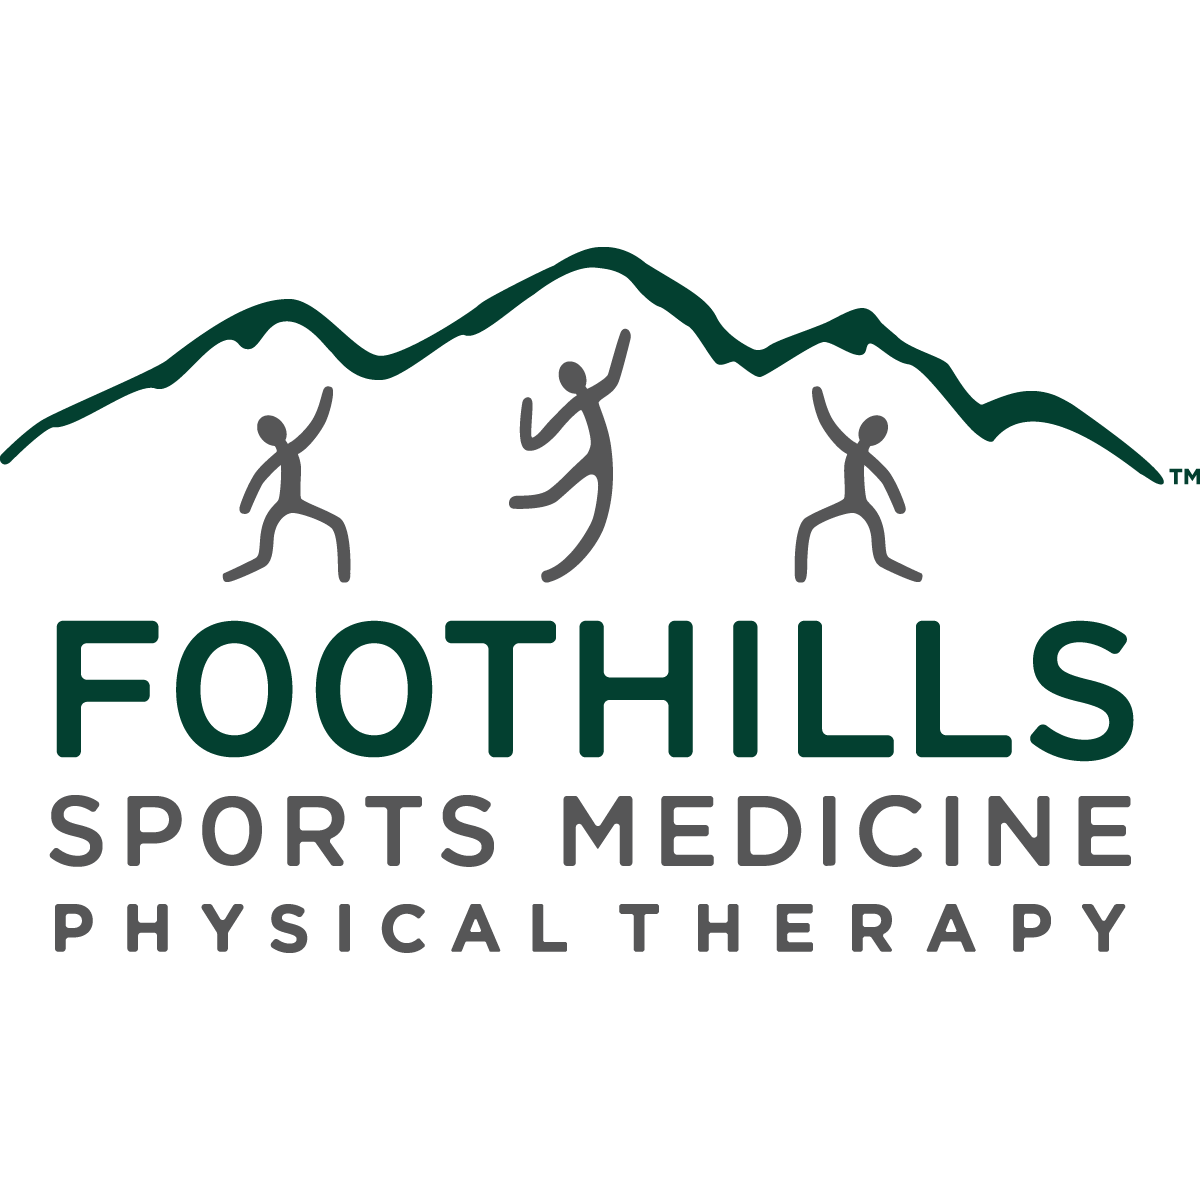 Foothills Physical Therapy & Sports Medicine - Phoenix, AZ 85016 - (602)595-6180 | ShowMeLocal.com